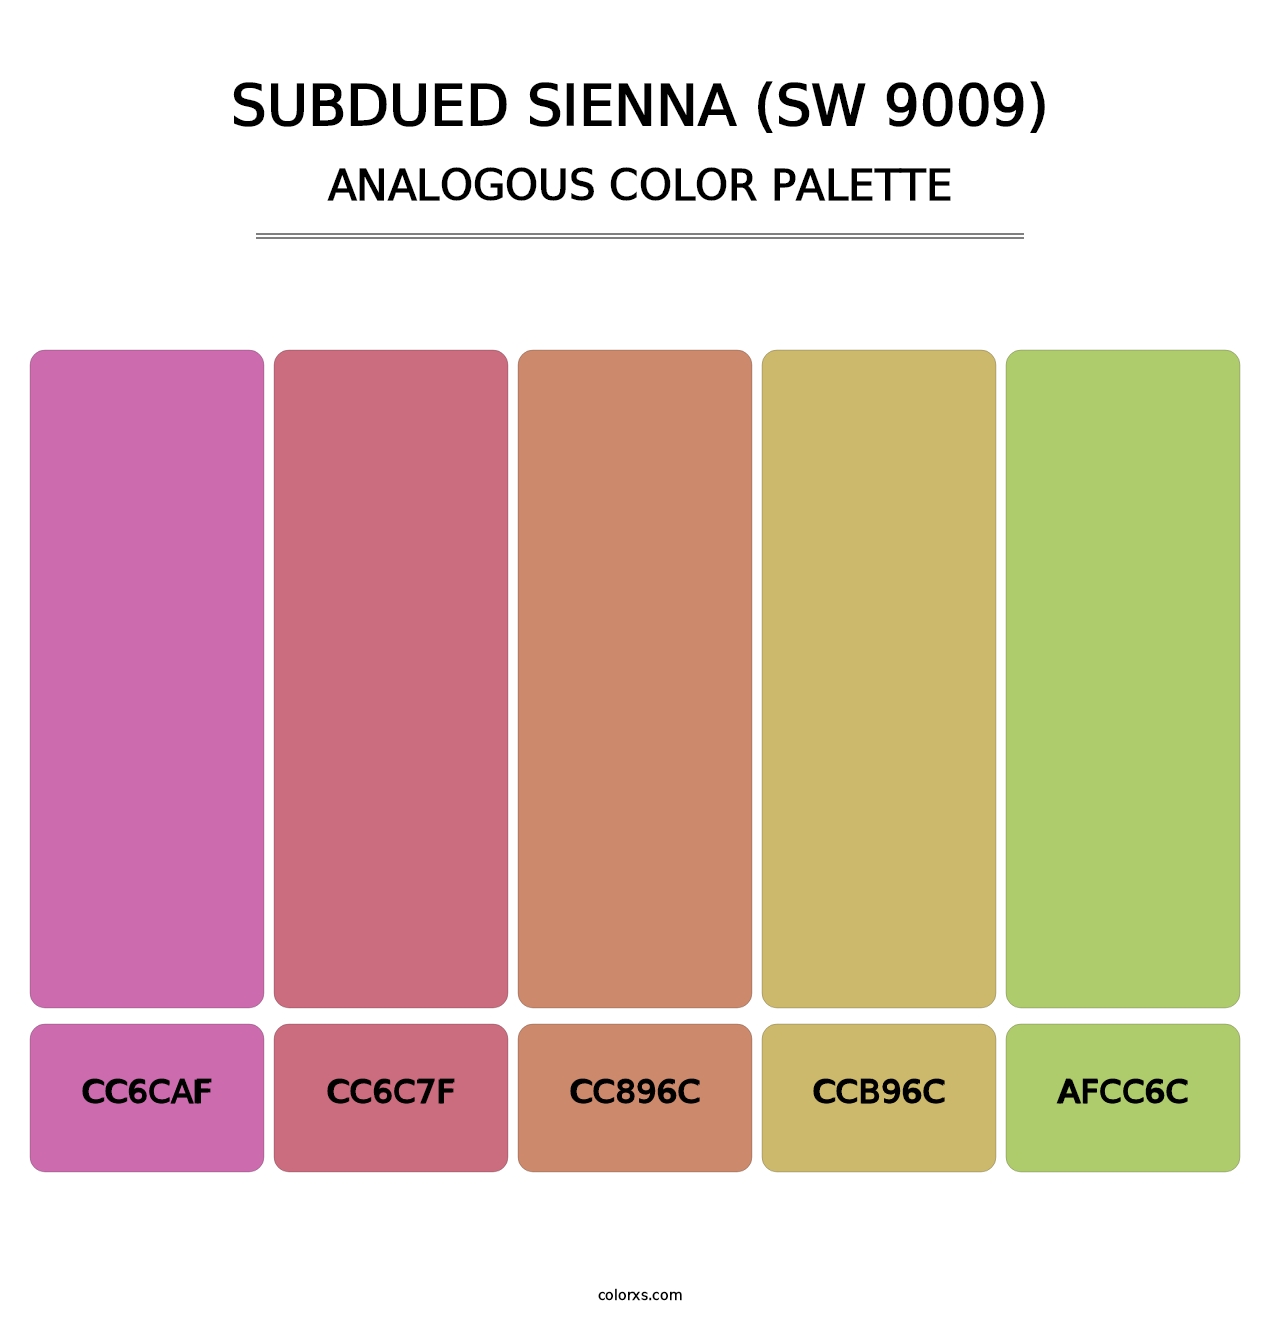 Subdued Sienna (SW 9009) - Analogous Color Palette